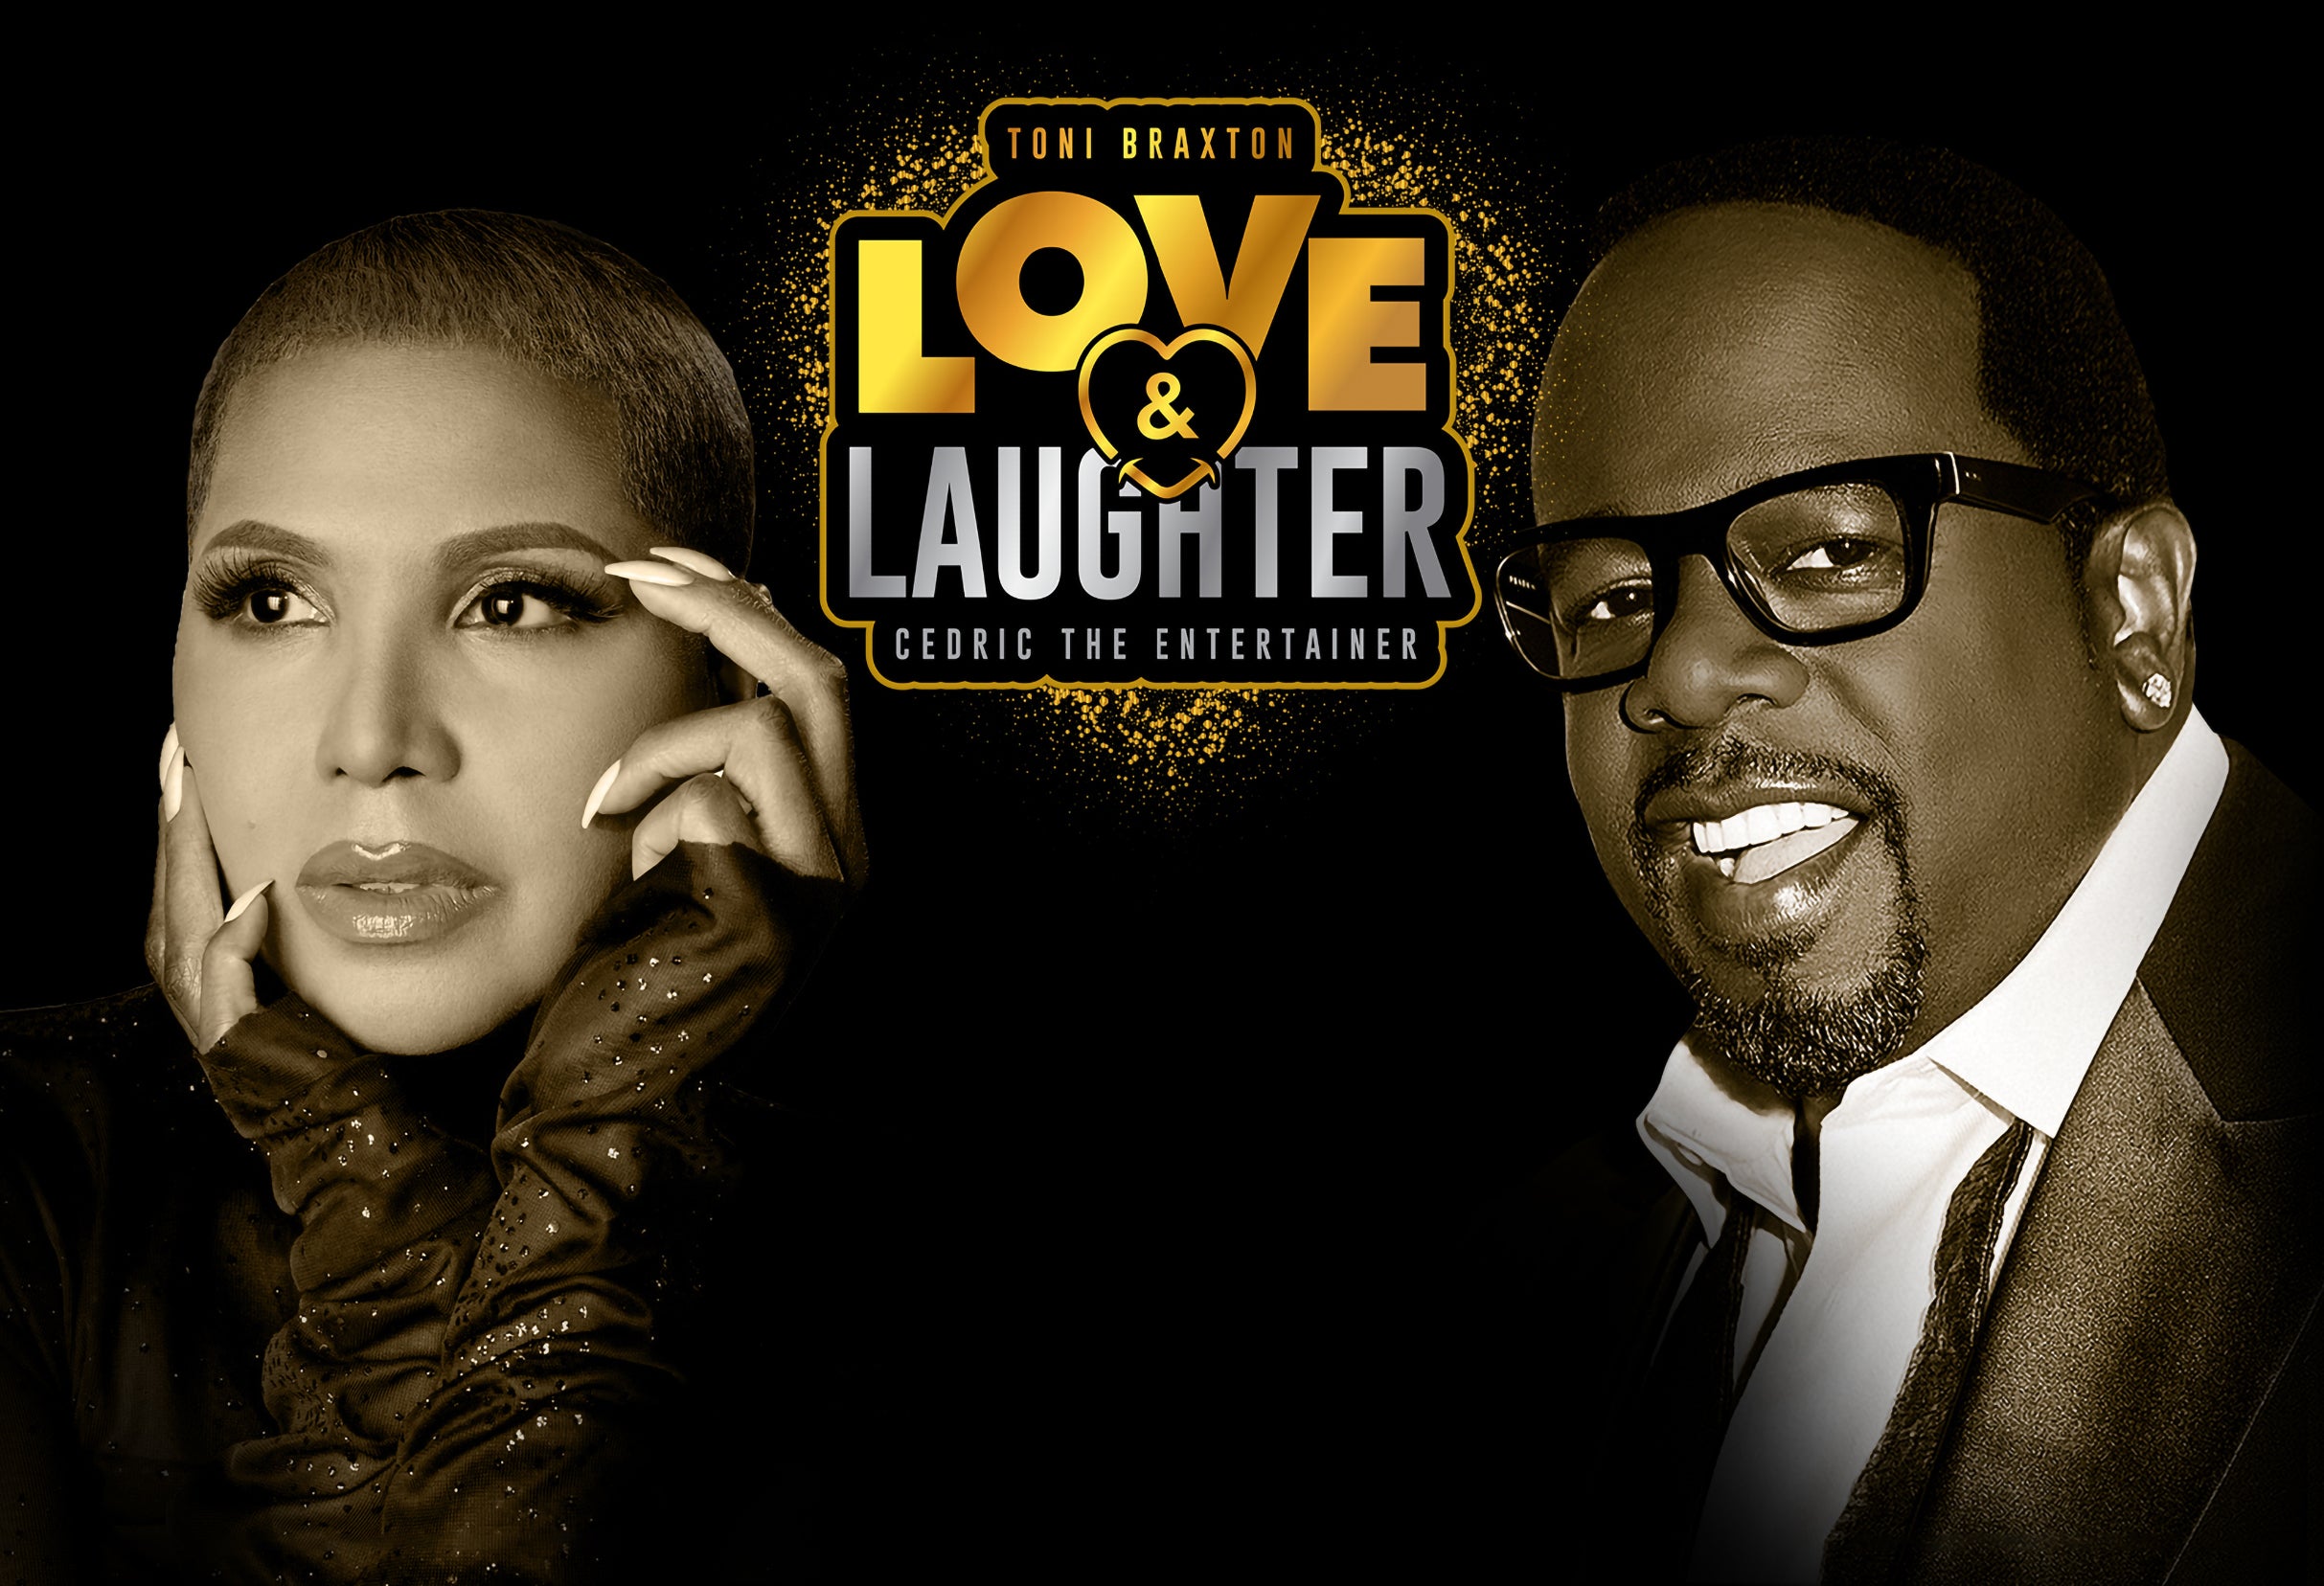 Love & Laughter: Toni Braxton & Cedric The Entertainer in Las Vegas promo photo for VIP Package presale offer code